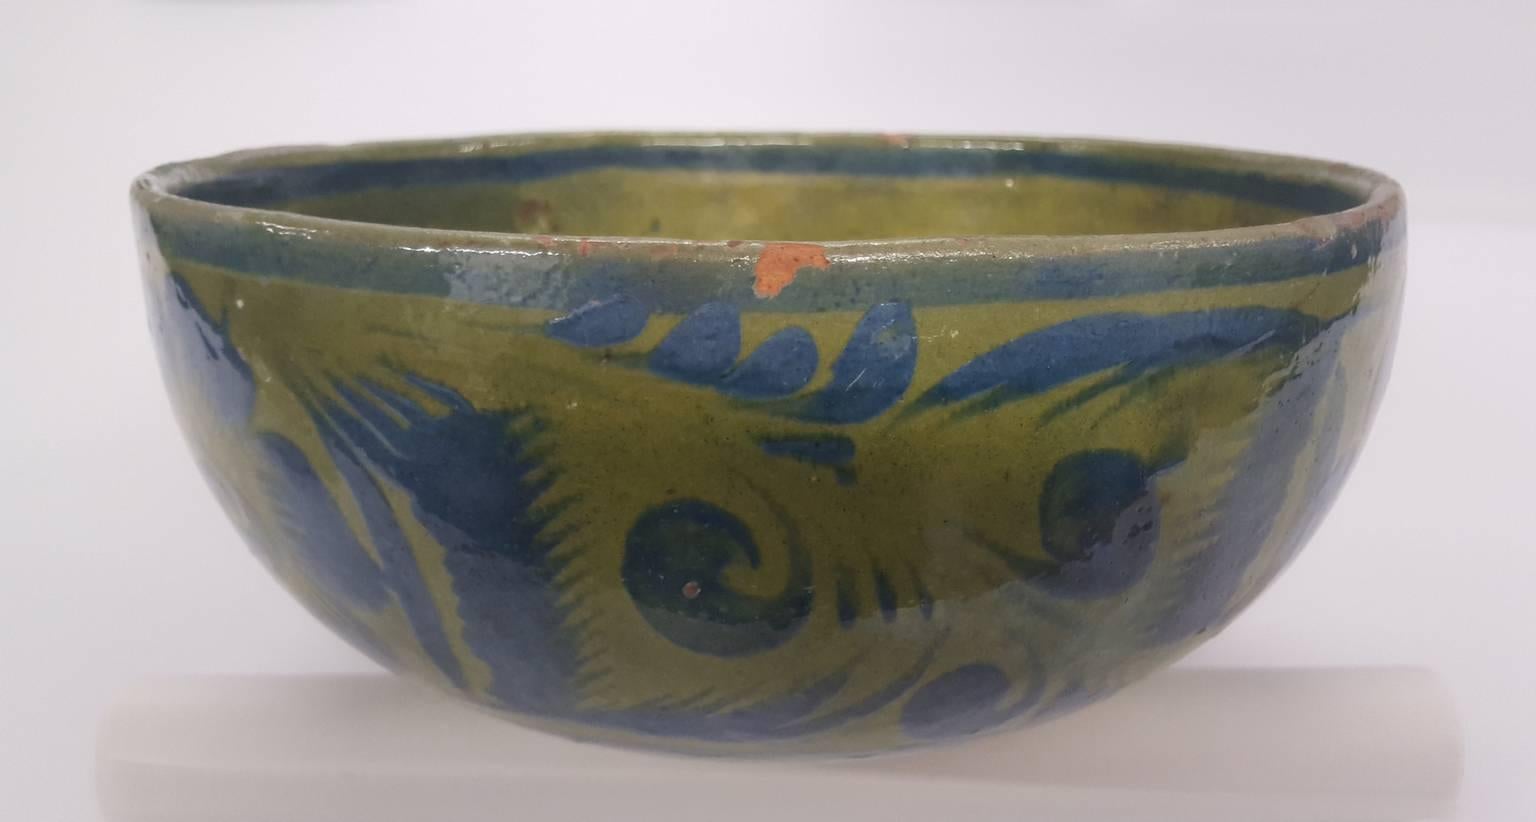 A vintage glazed Mexican pottery bowl in blue and green. It is in good condition but has a chip at the rim and minor losses in small spots during glazing. It is a charming decorative object with a Folk Art appeal.